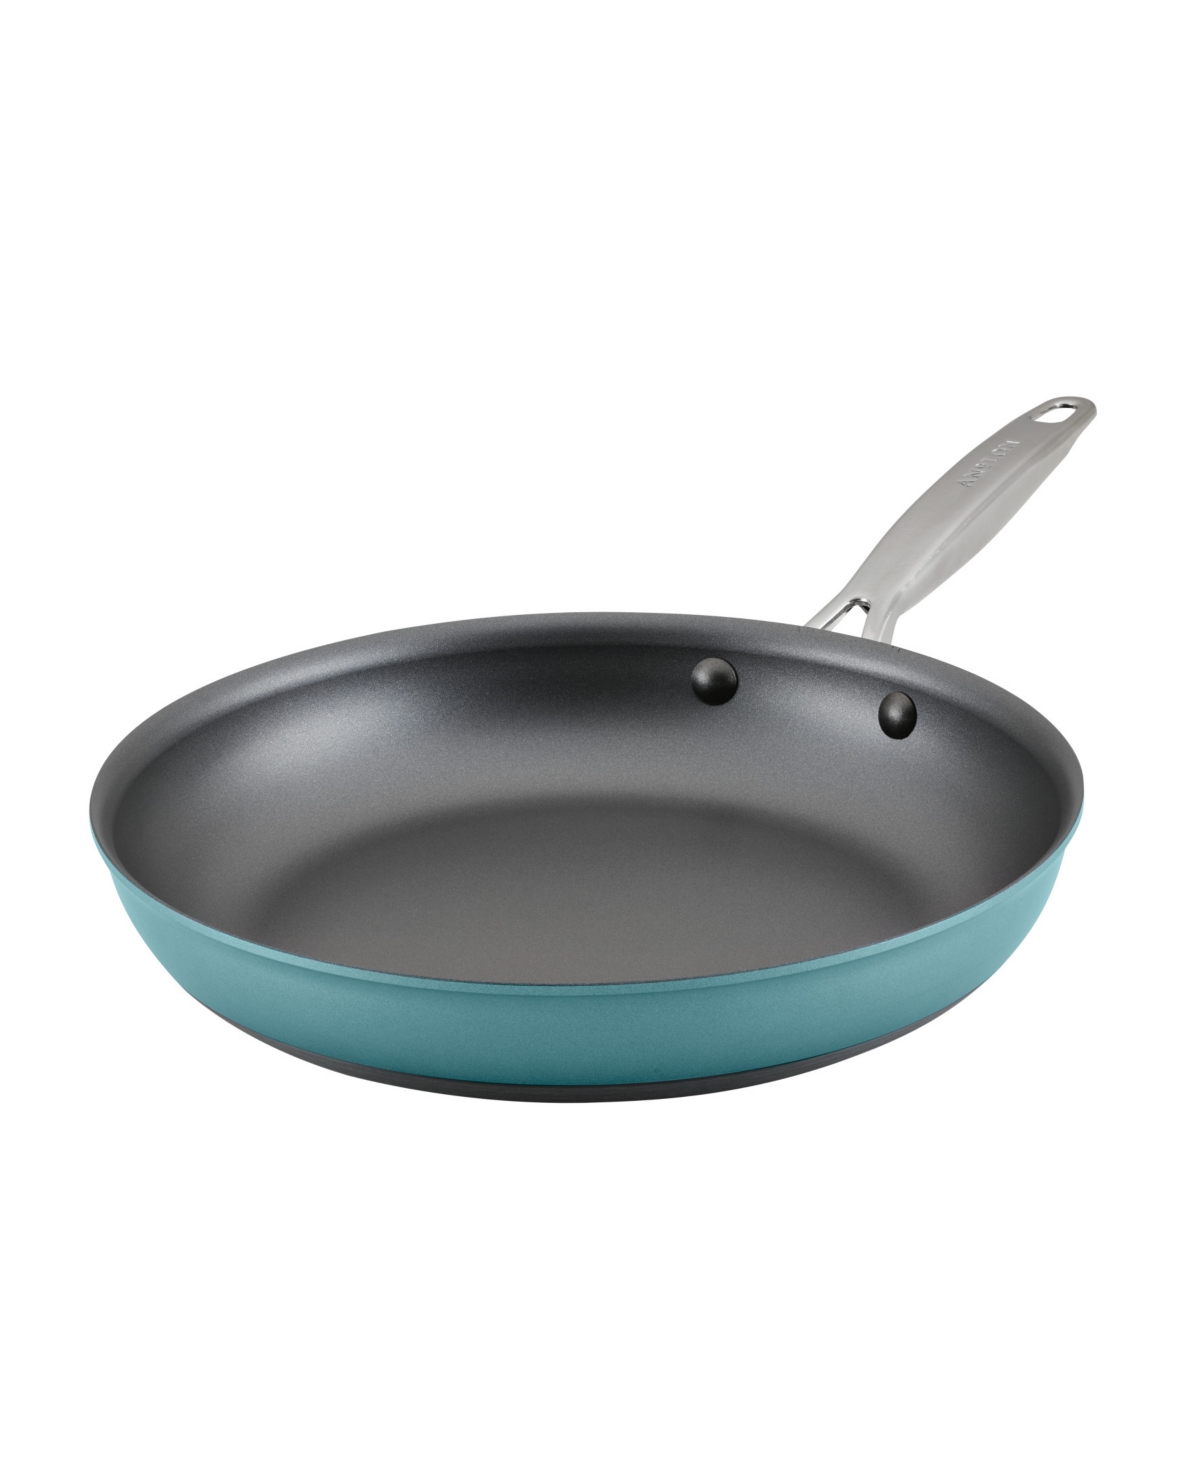 Shop Anolon Achieve Hard Anodized Nonstick 12" Frying Pan In Teal